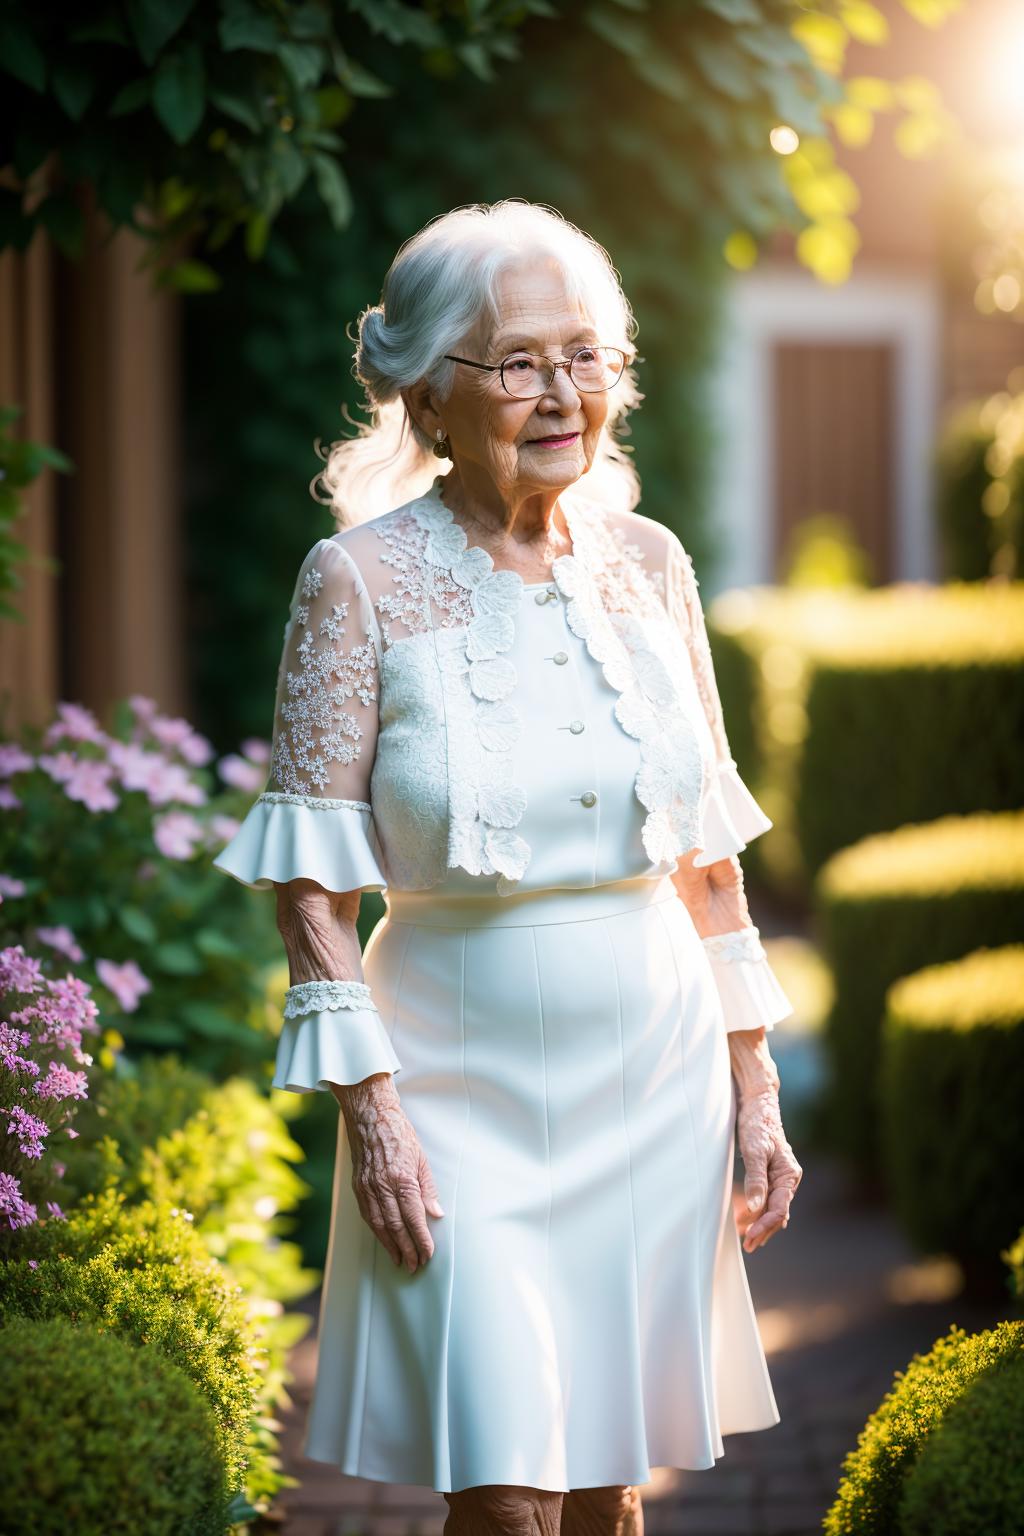 Elderly Woman Wearing Glasses and White Dress Standing Outdoors.